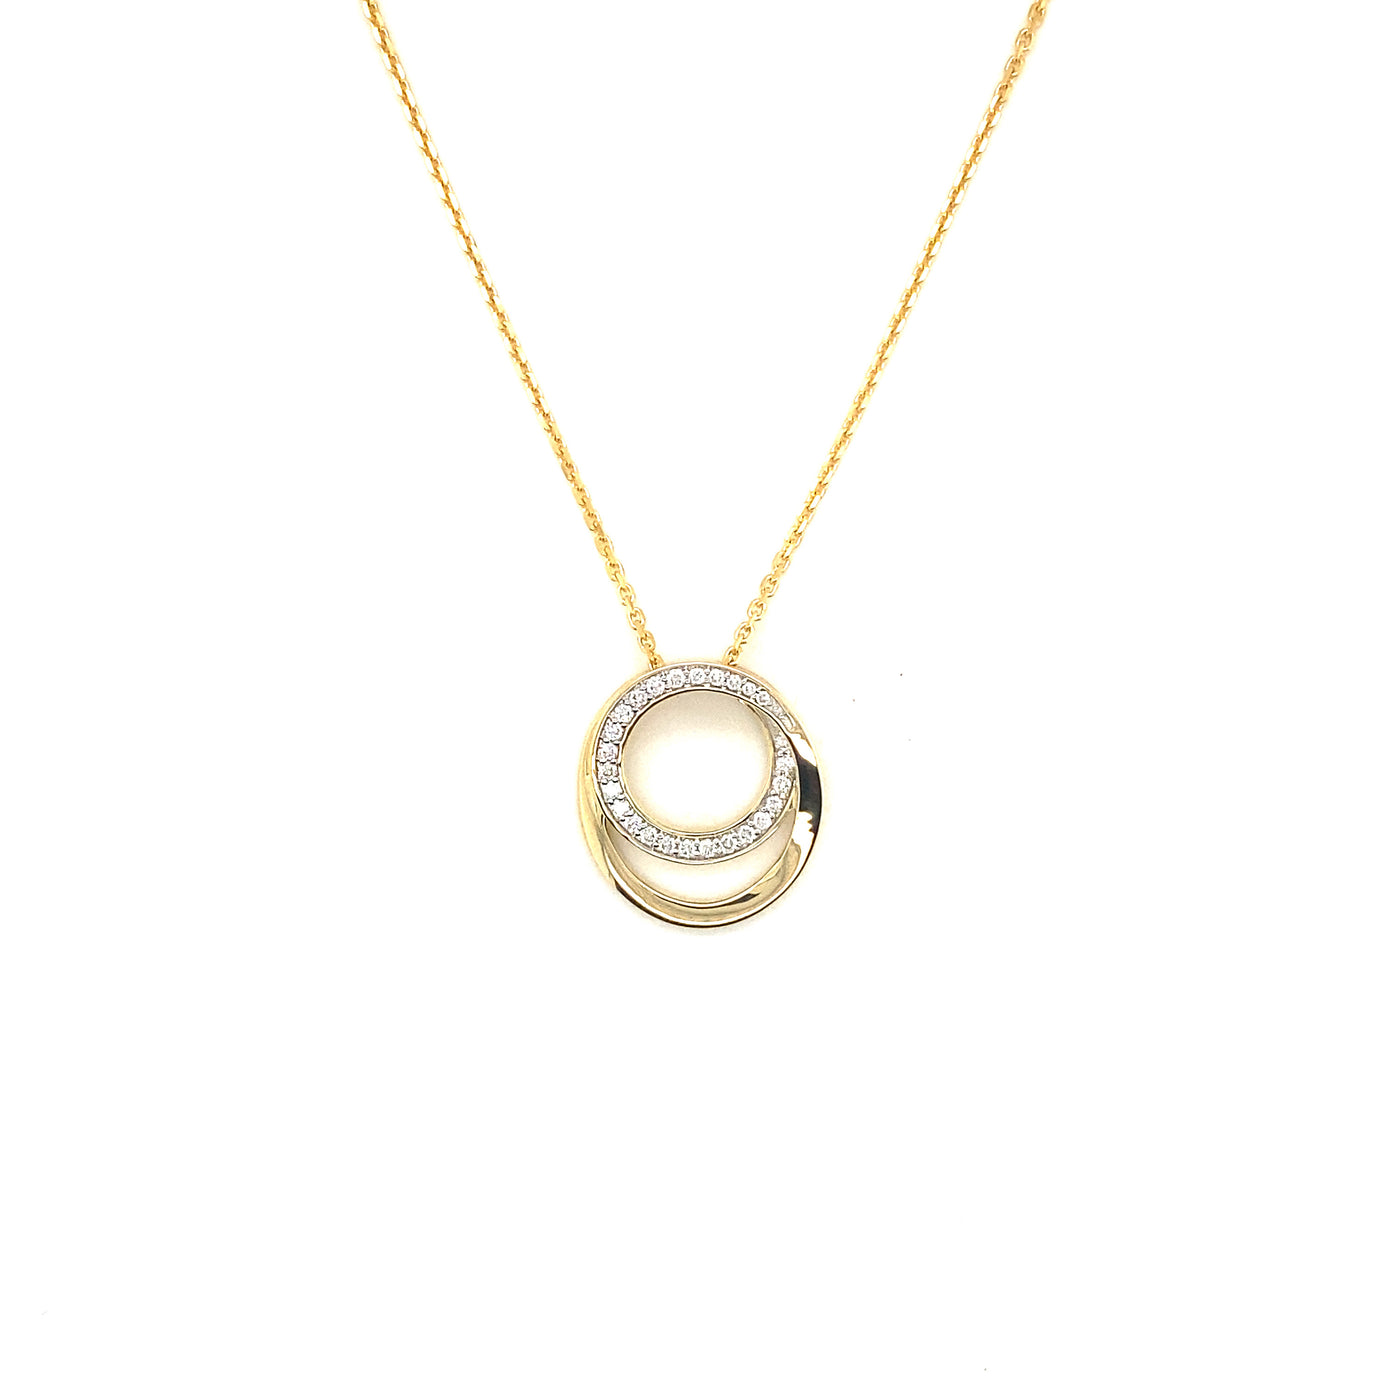 9ct double circle necklace set with eco grown diamonds